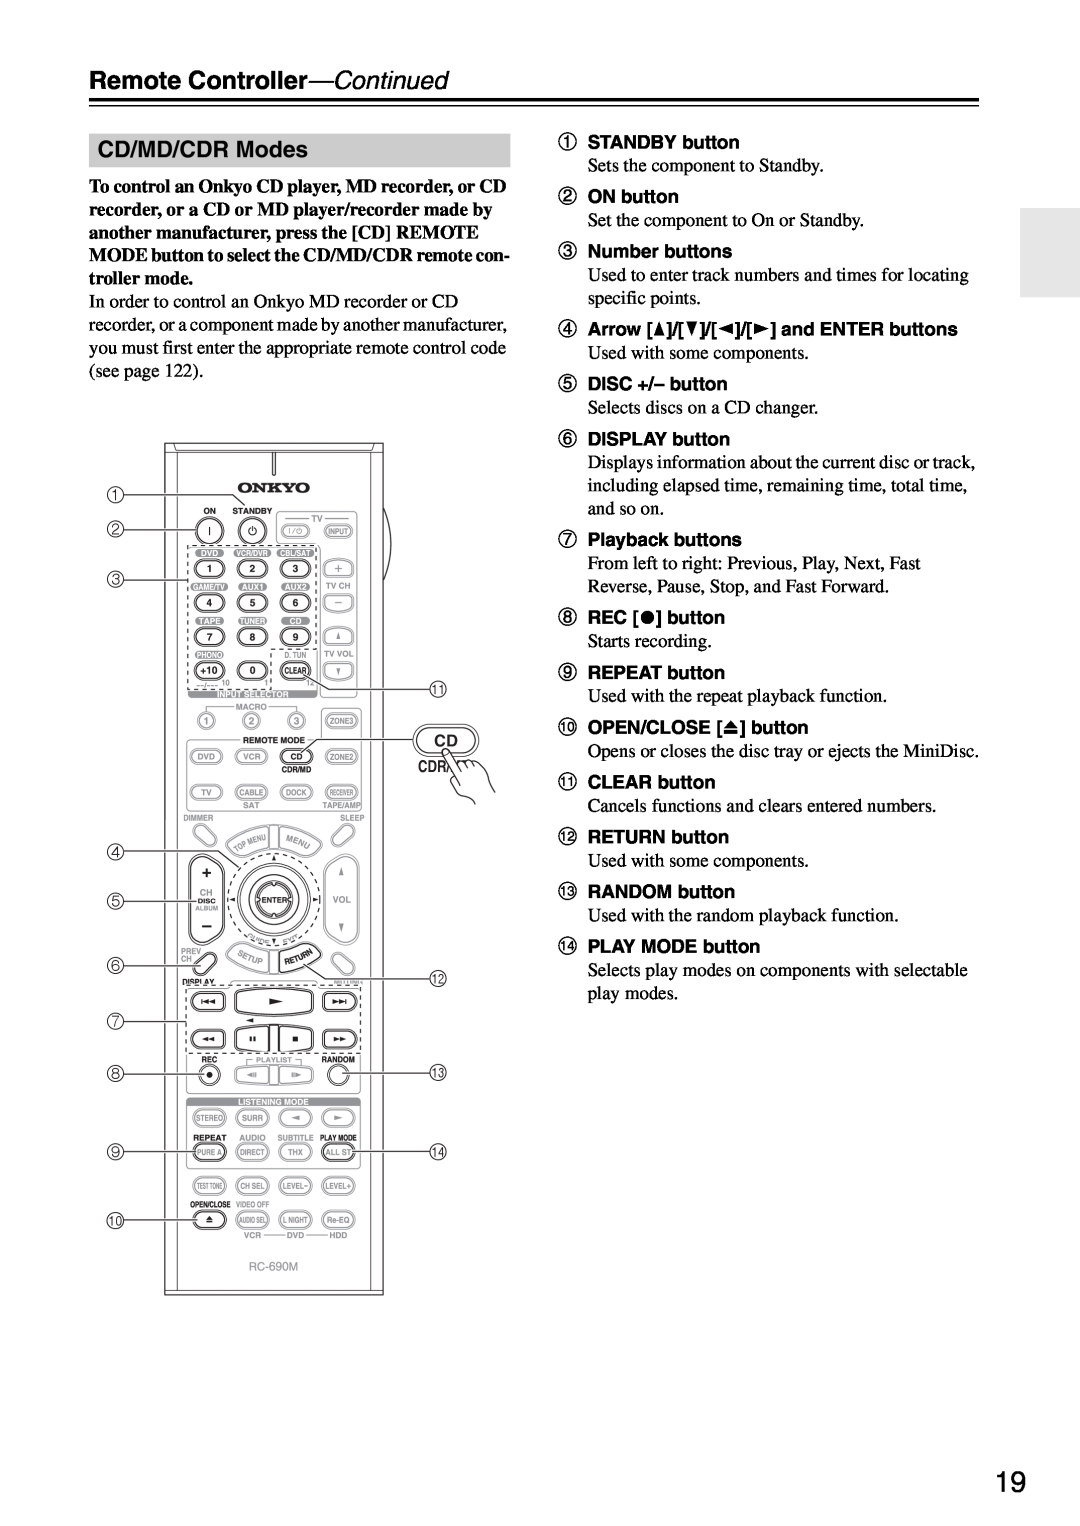 Onkyo PR-SC886 instruction manual CD/MD/CDR Modes, Remote Controller—Continued 